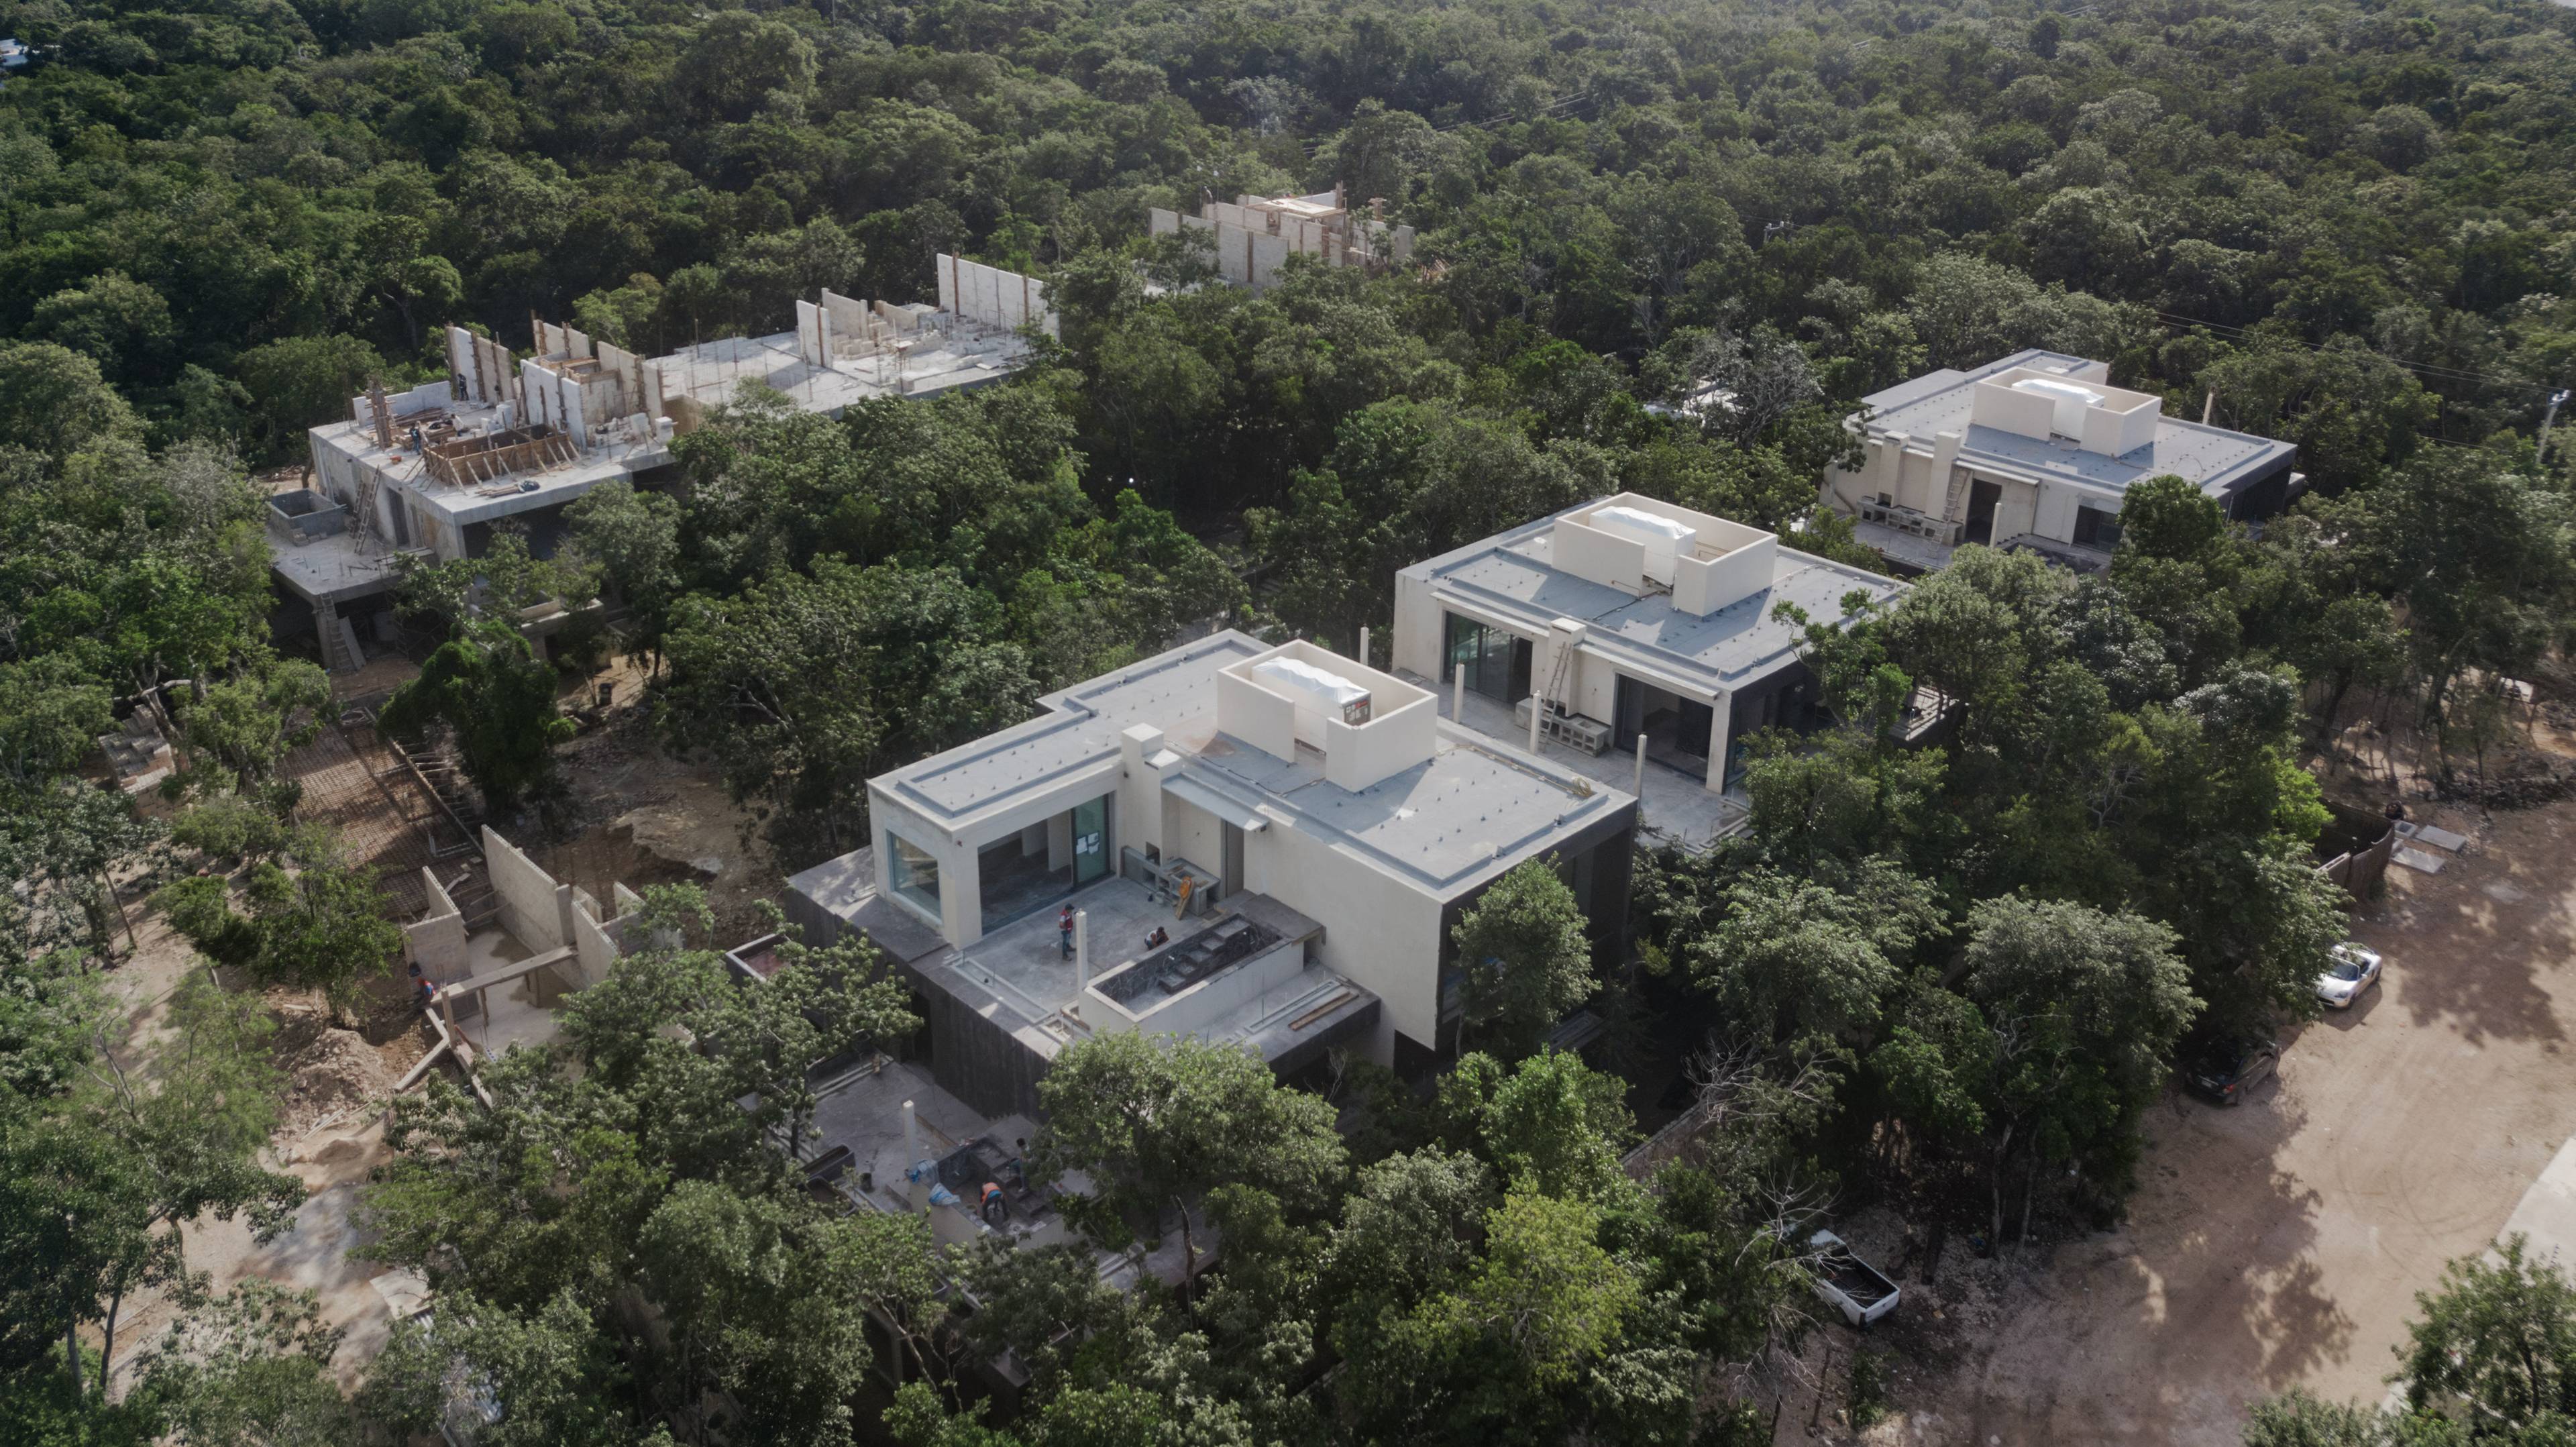 Inspiring Lifestyle Within A Sustainable Environment | Tulum, Mexico | Loft